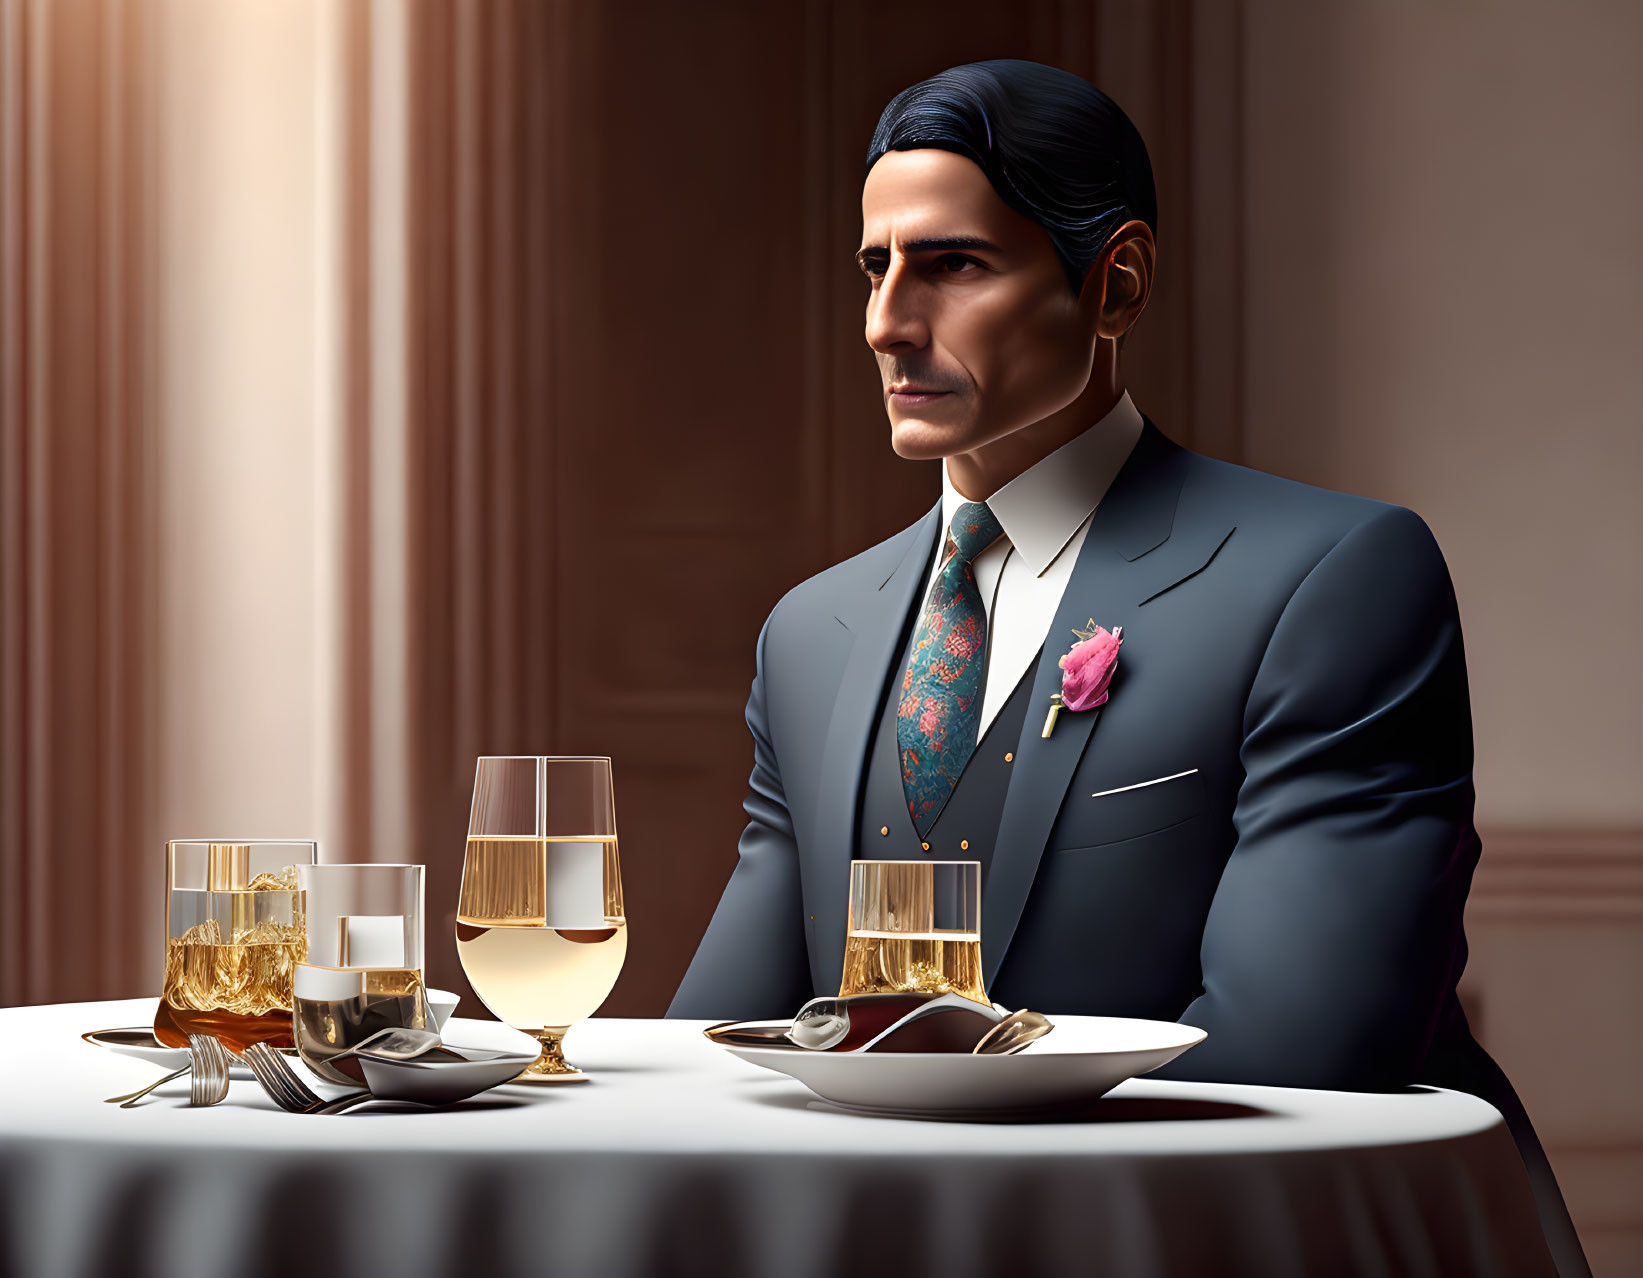 Elegant man in suit at dining table with wine and plate